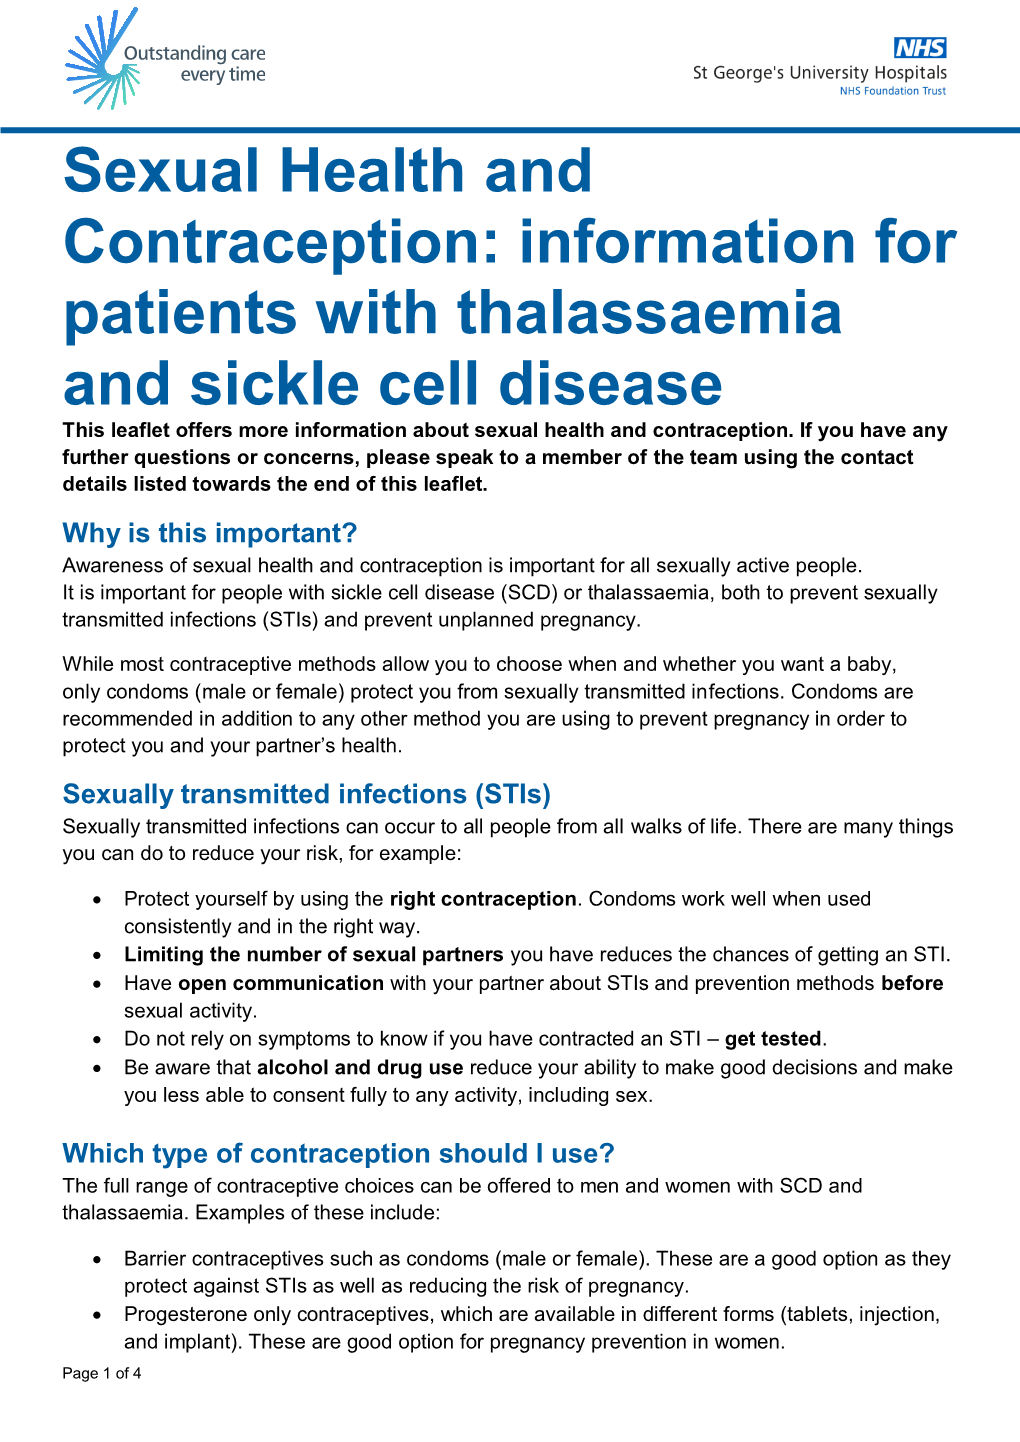 Information for Patients with Thalassaemia and Sickle Cell Disease This Leaflet Offers More Information About Sexual Health and Contraception